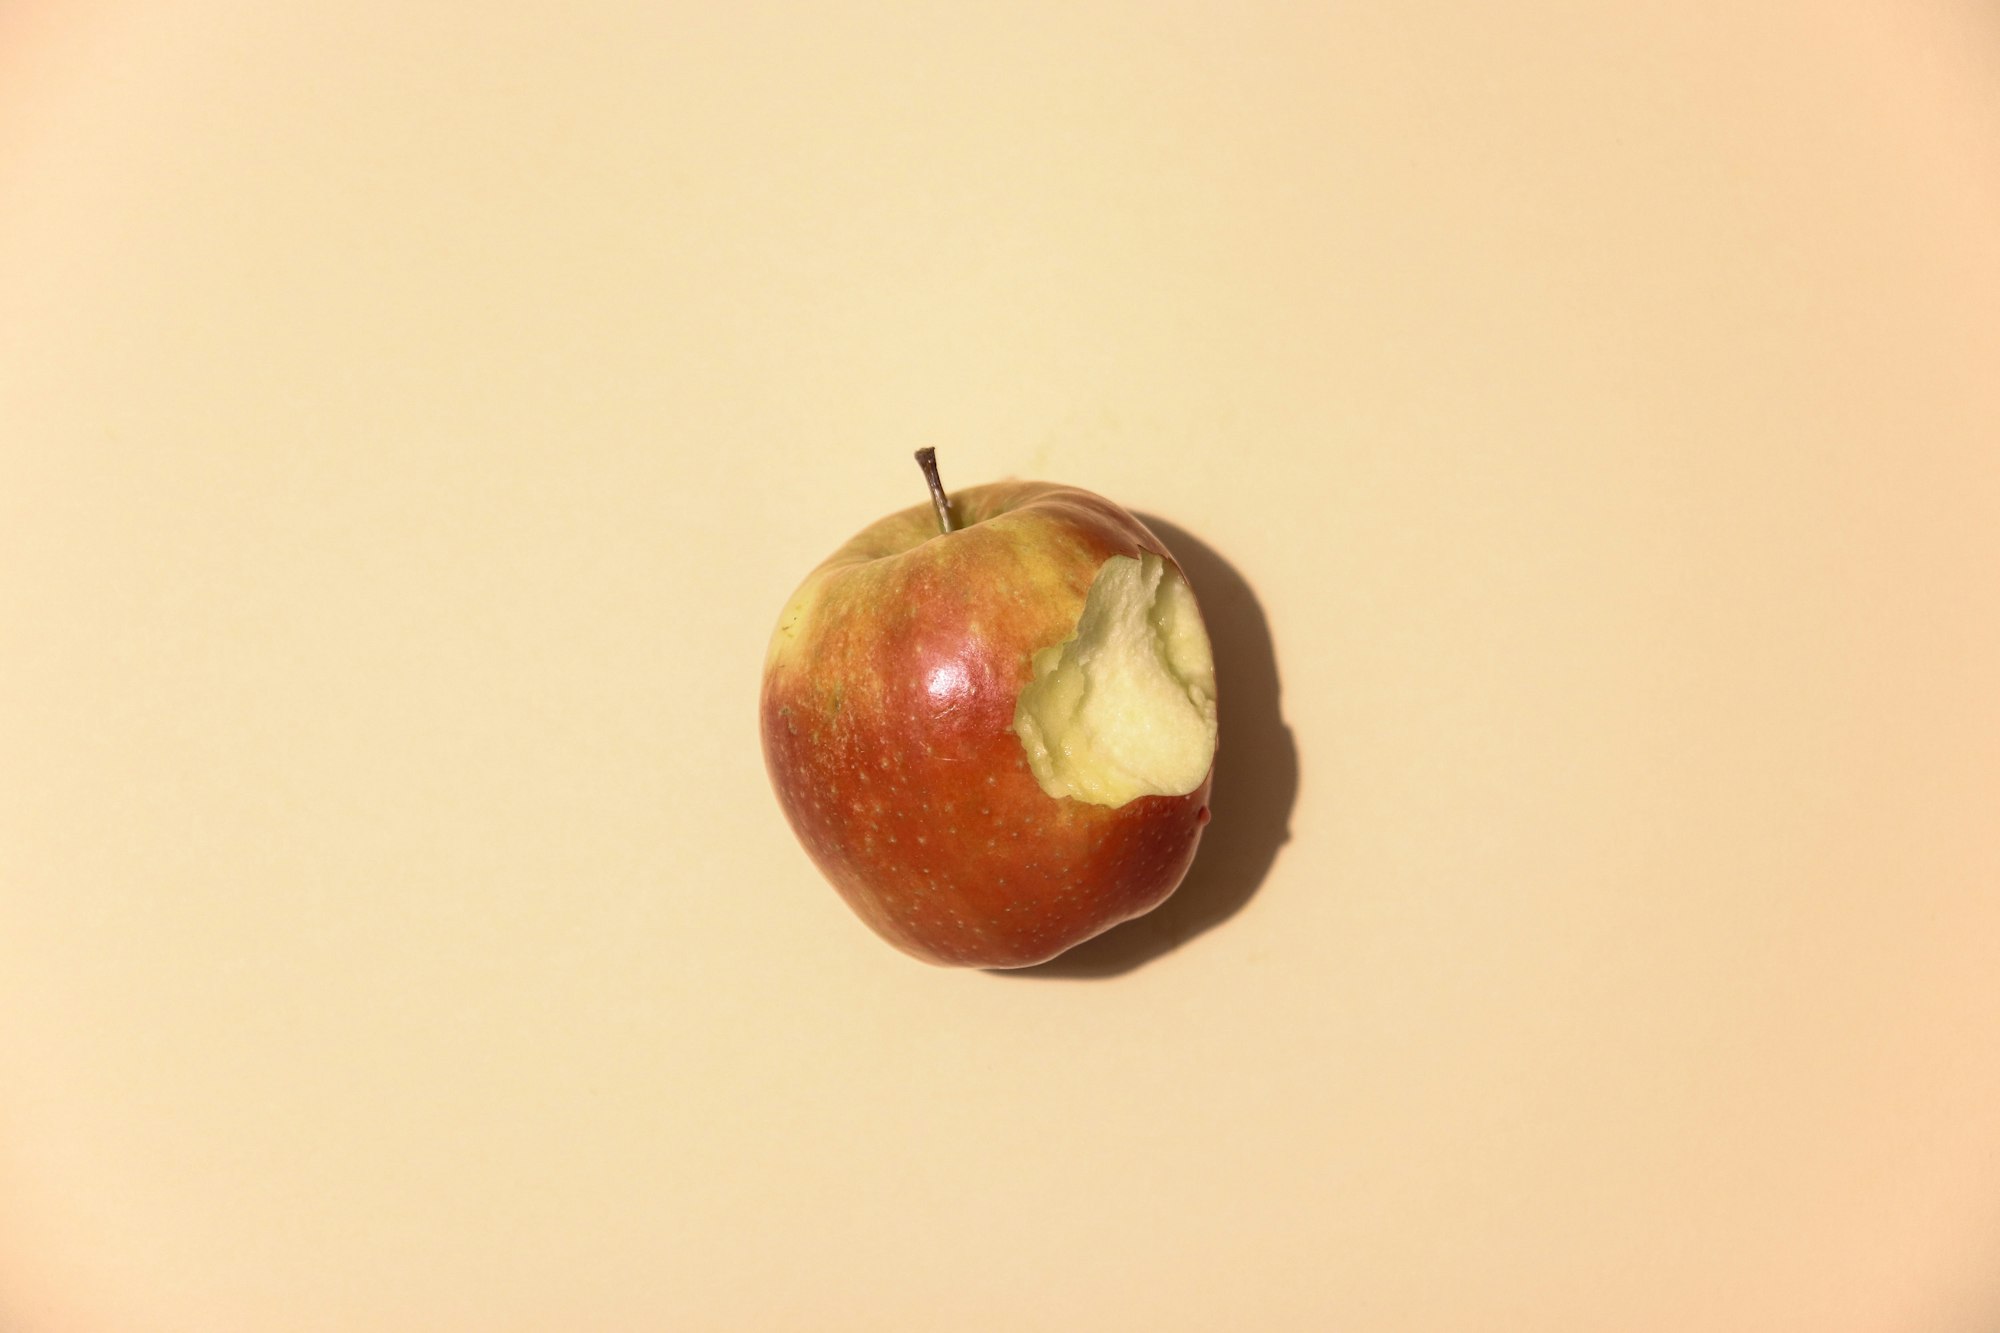 apple with a bite